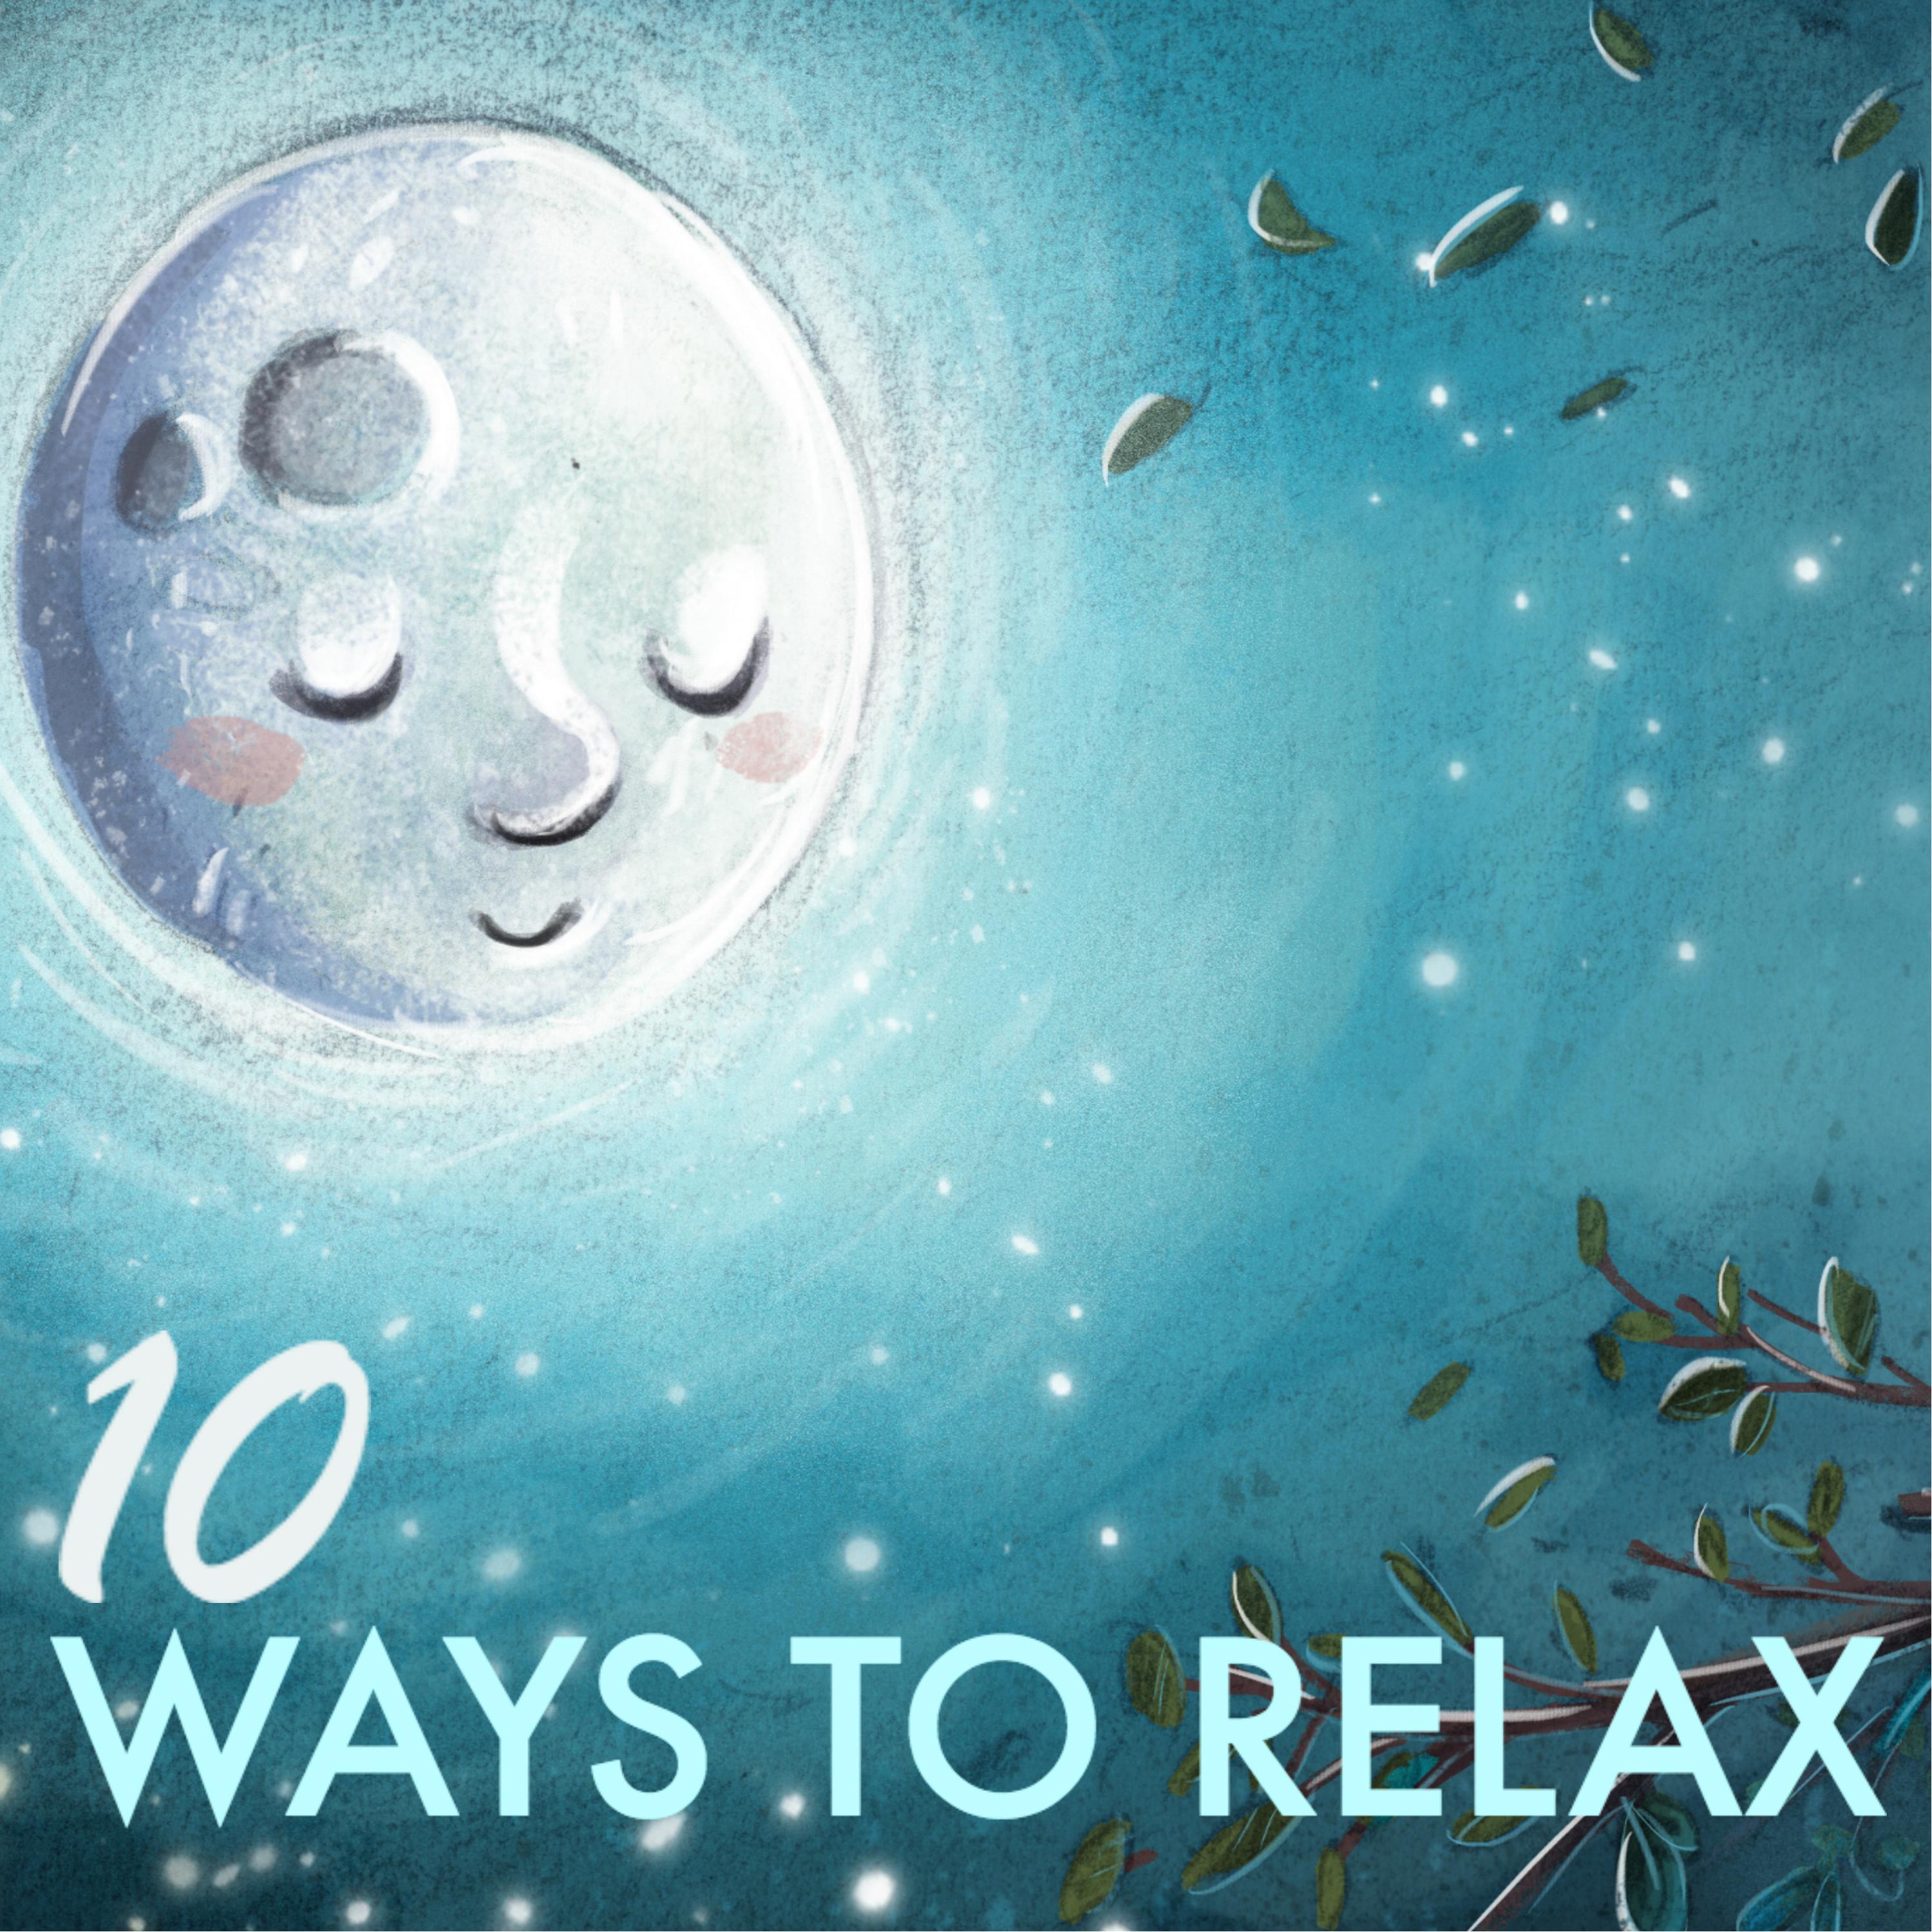 10 Ways to Relax